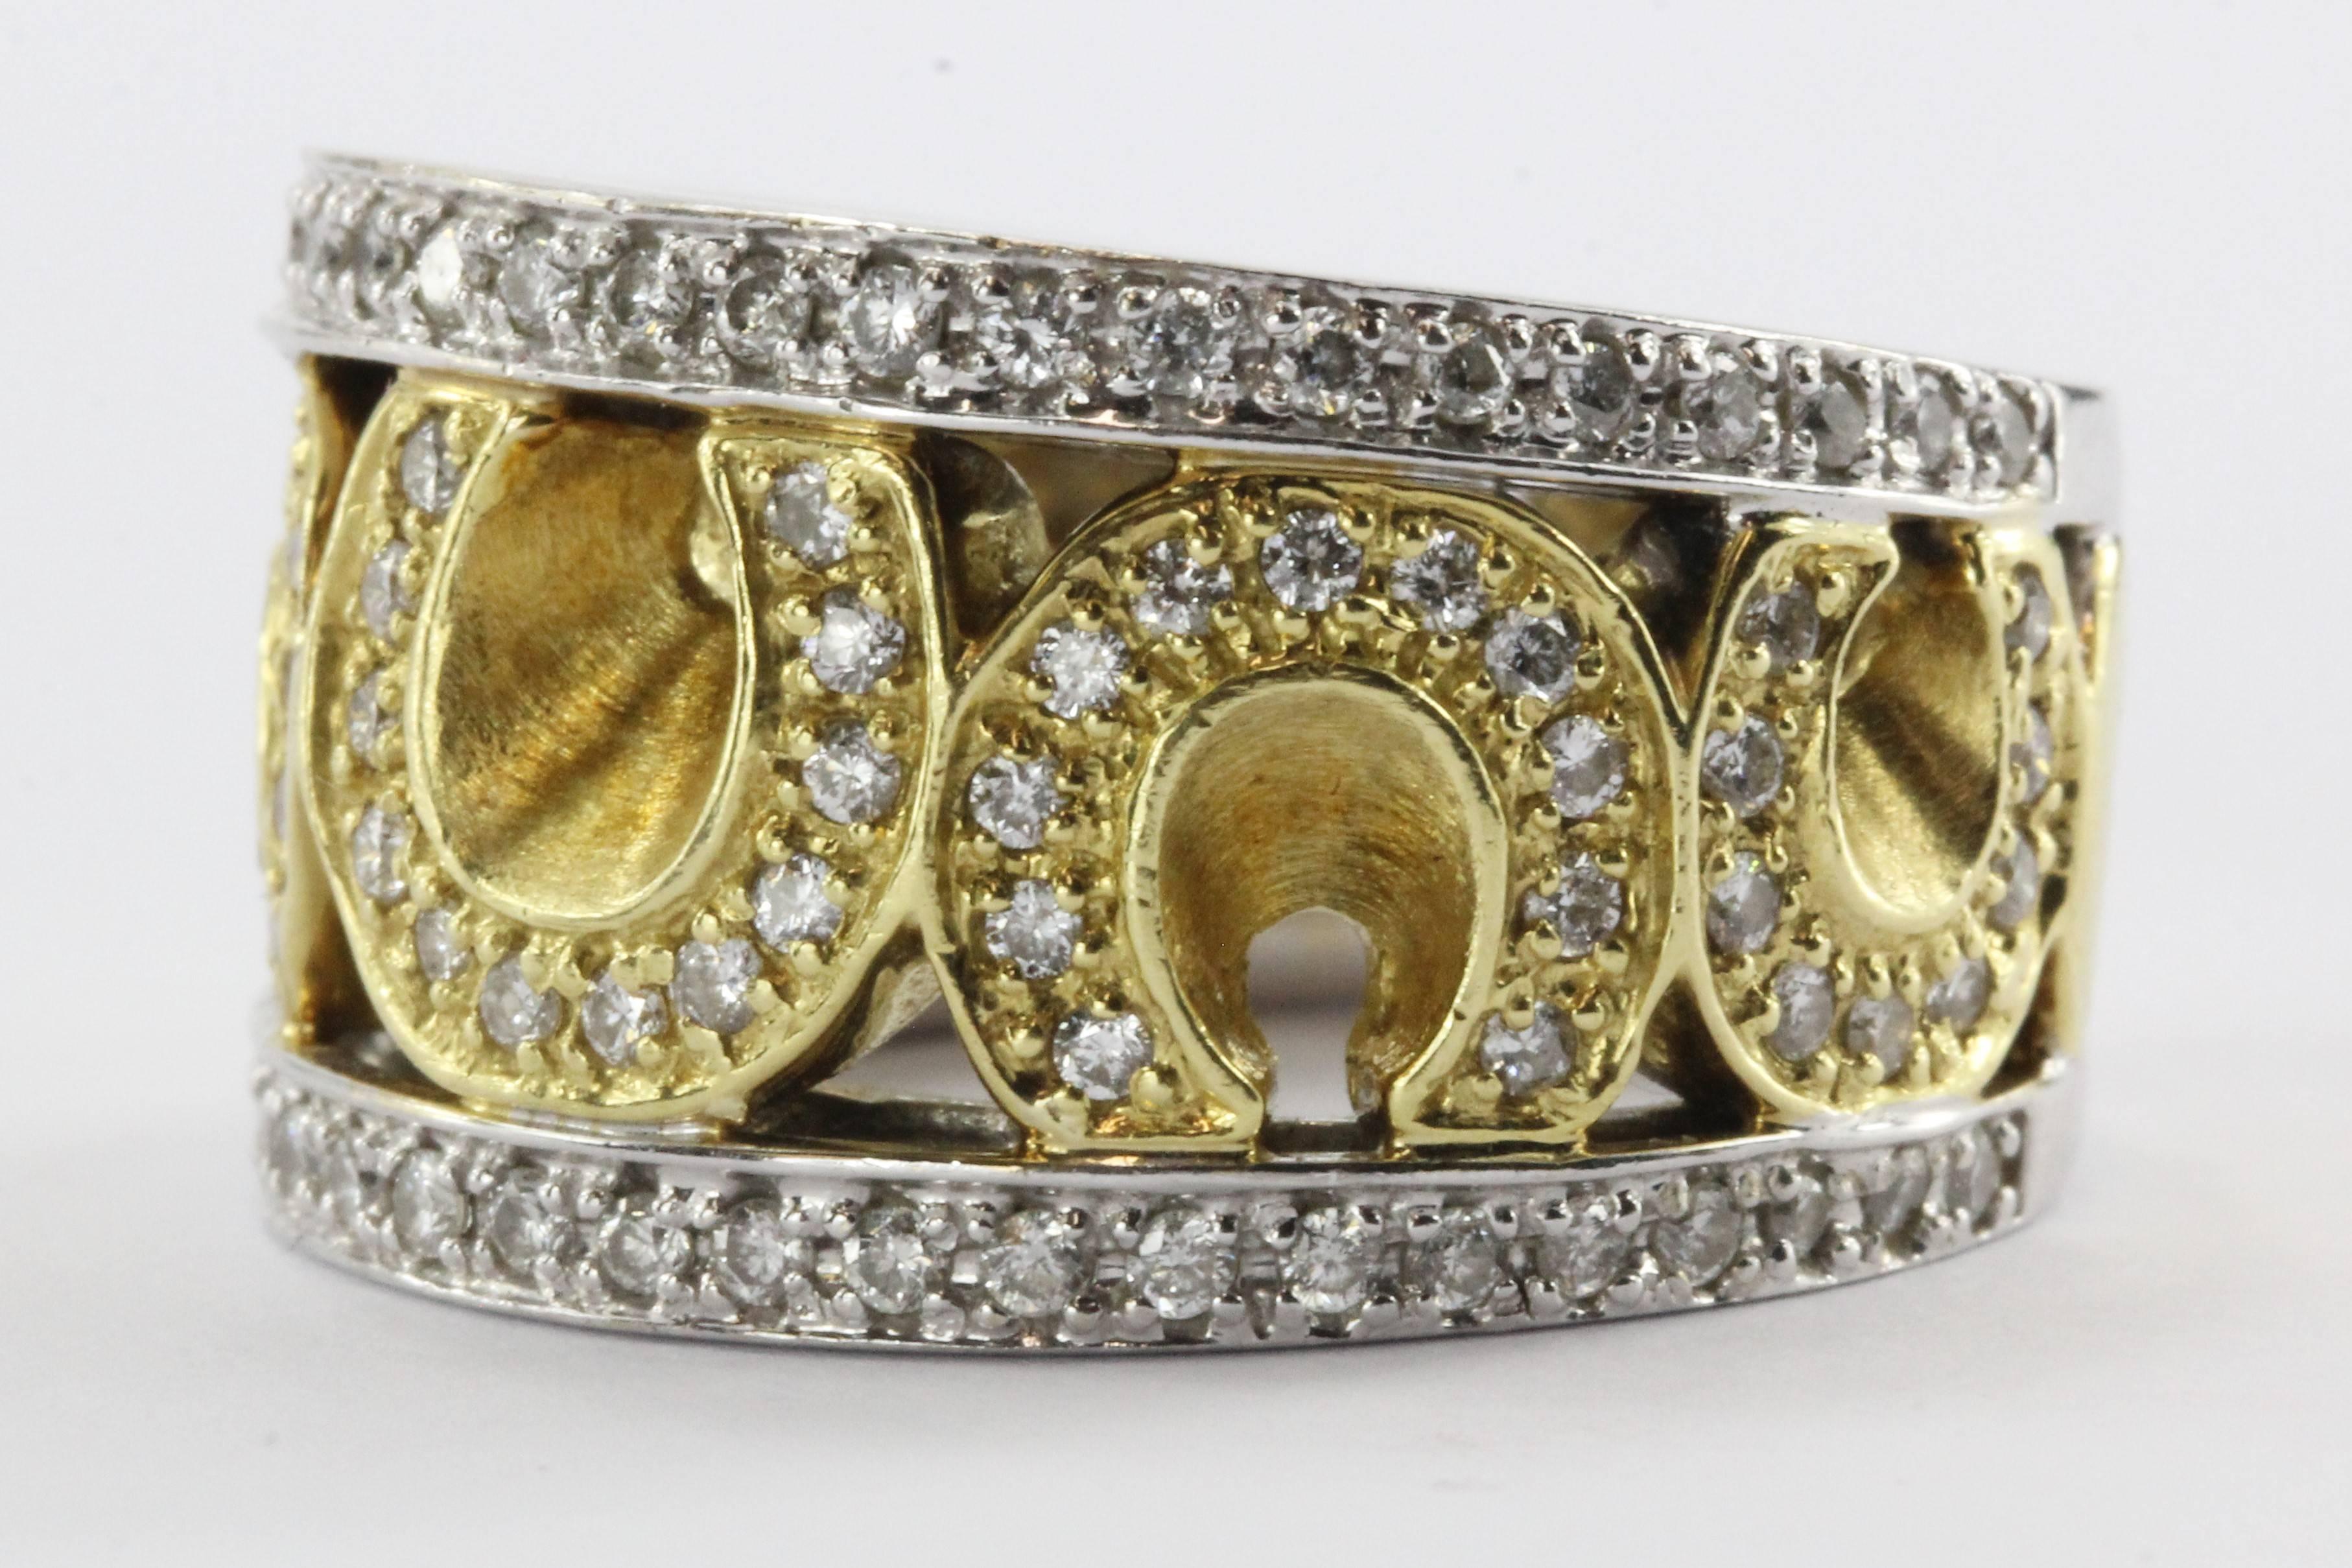 18K White & Yellow Gold Sonia Bitton 1.5 Carat Diamond Horseshoe Ring. The ring is in great used estate condition and ready to wear. There are signs of wear on the sides of the ring. The ring is signed Sonia B. 18K. It is set with approximately 1.5